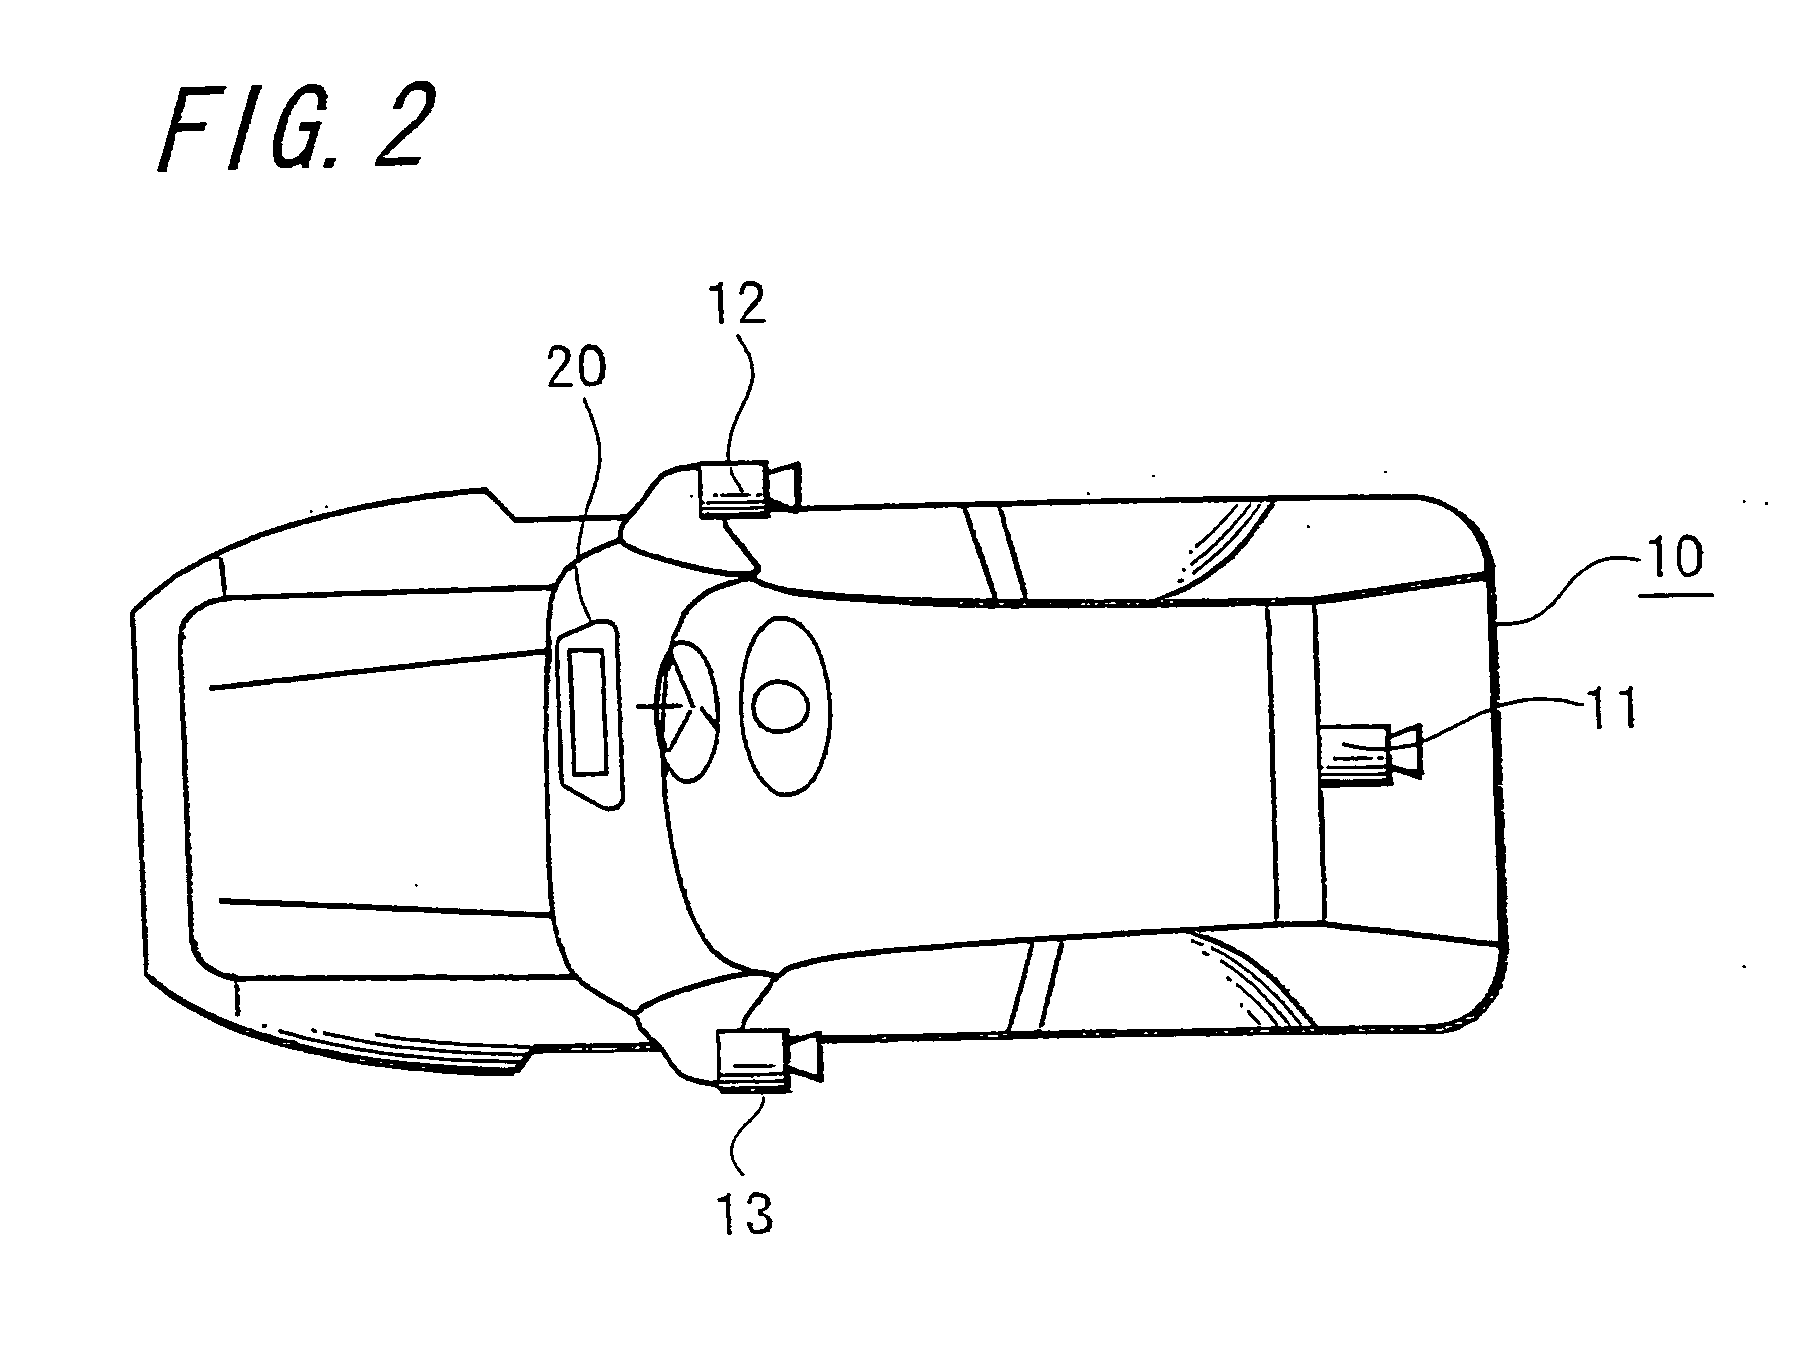 Image display apparatus for mounting on vehicle